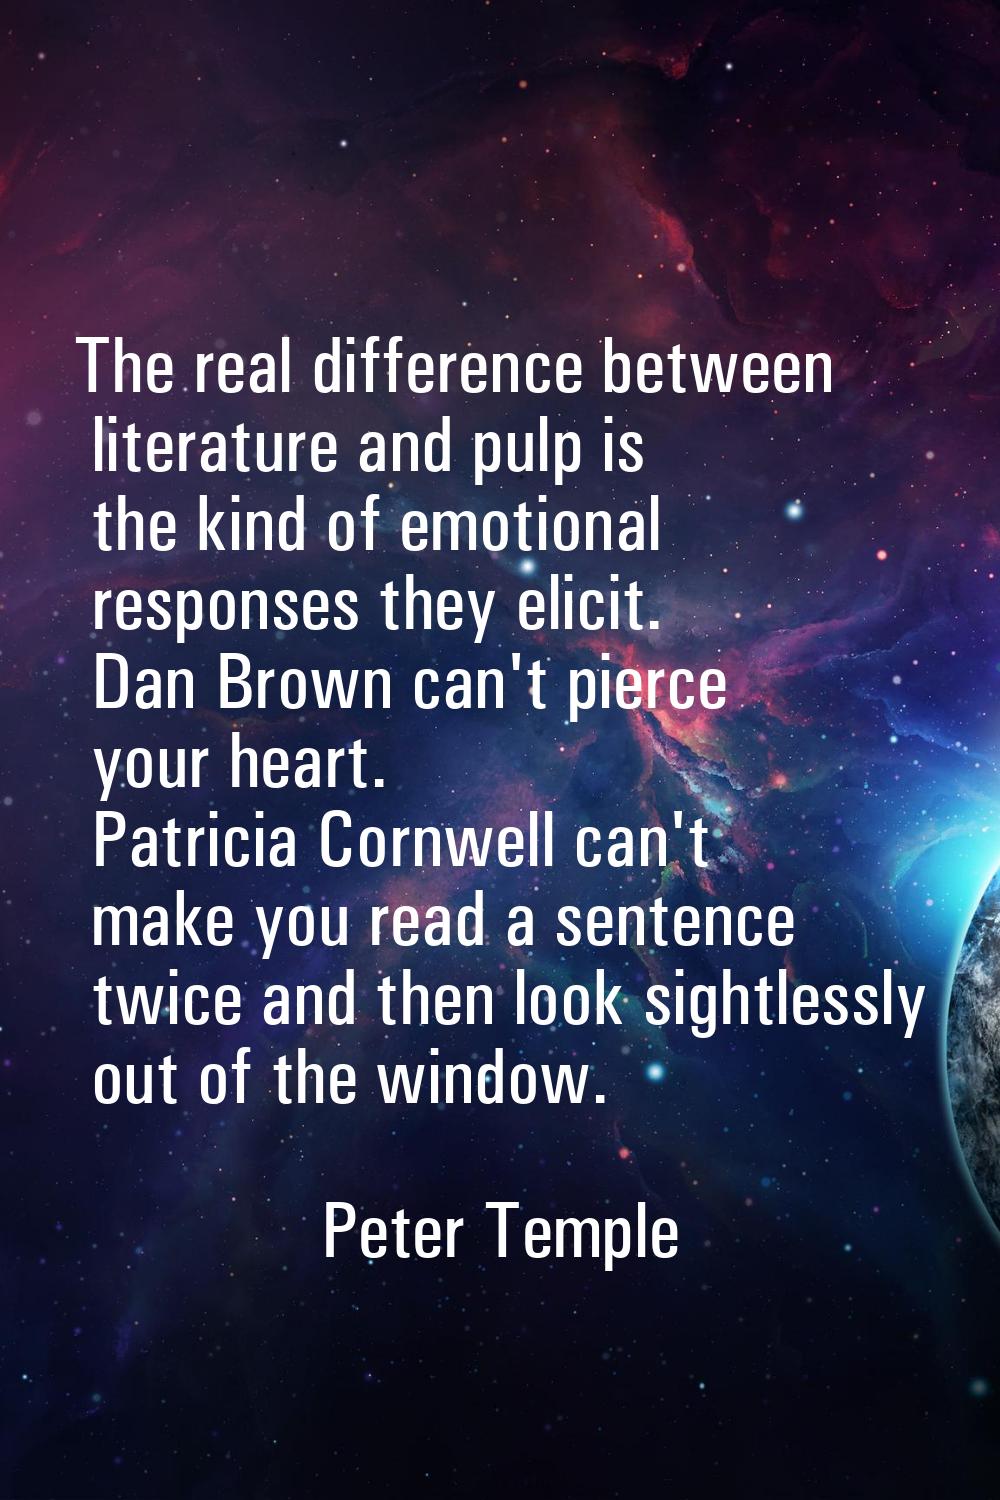 The real difference between literature and pulp is the kind of emotional responses they elicit. Dan